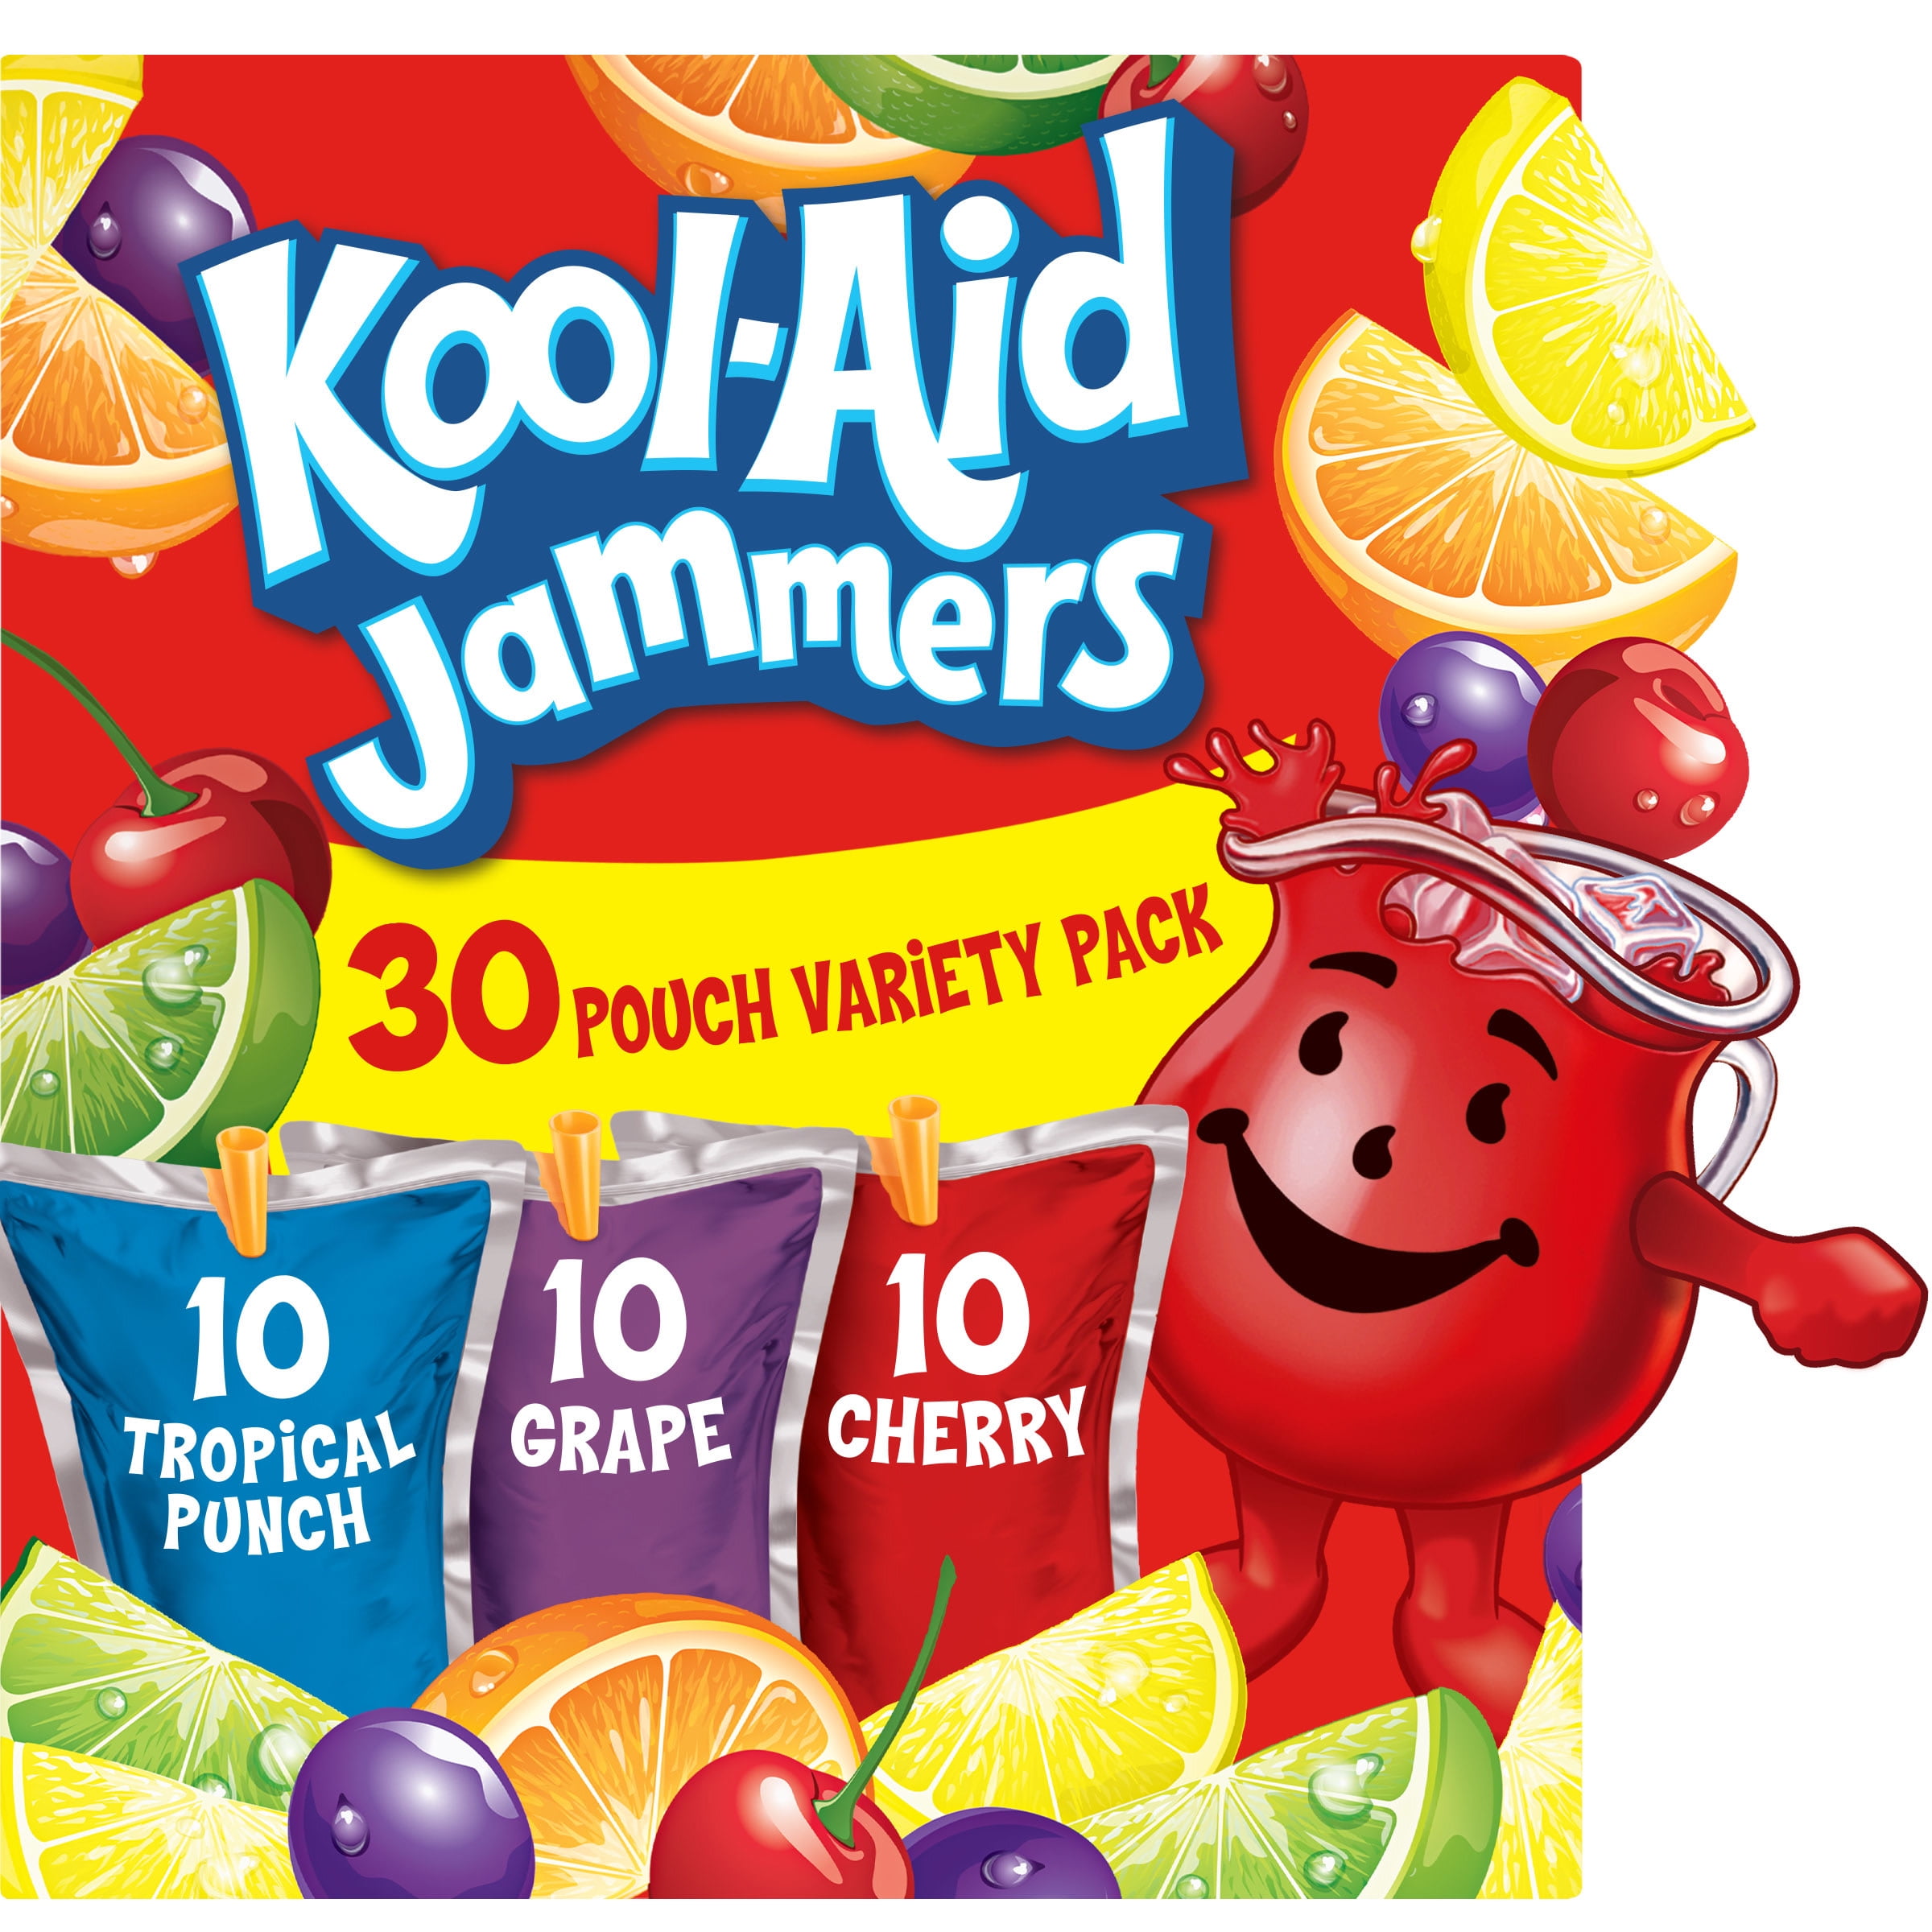 Kool Aid Jammers Variety Pack with Tropical Punch, Grape & Cherry Kids Drink Juice Box Pouches, 30 ct Box, 6 fl oz Pouches